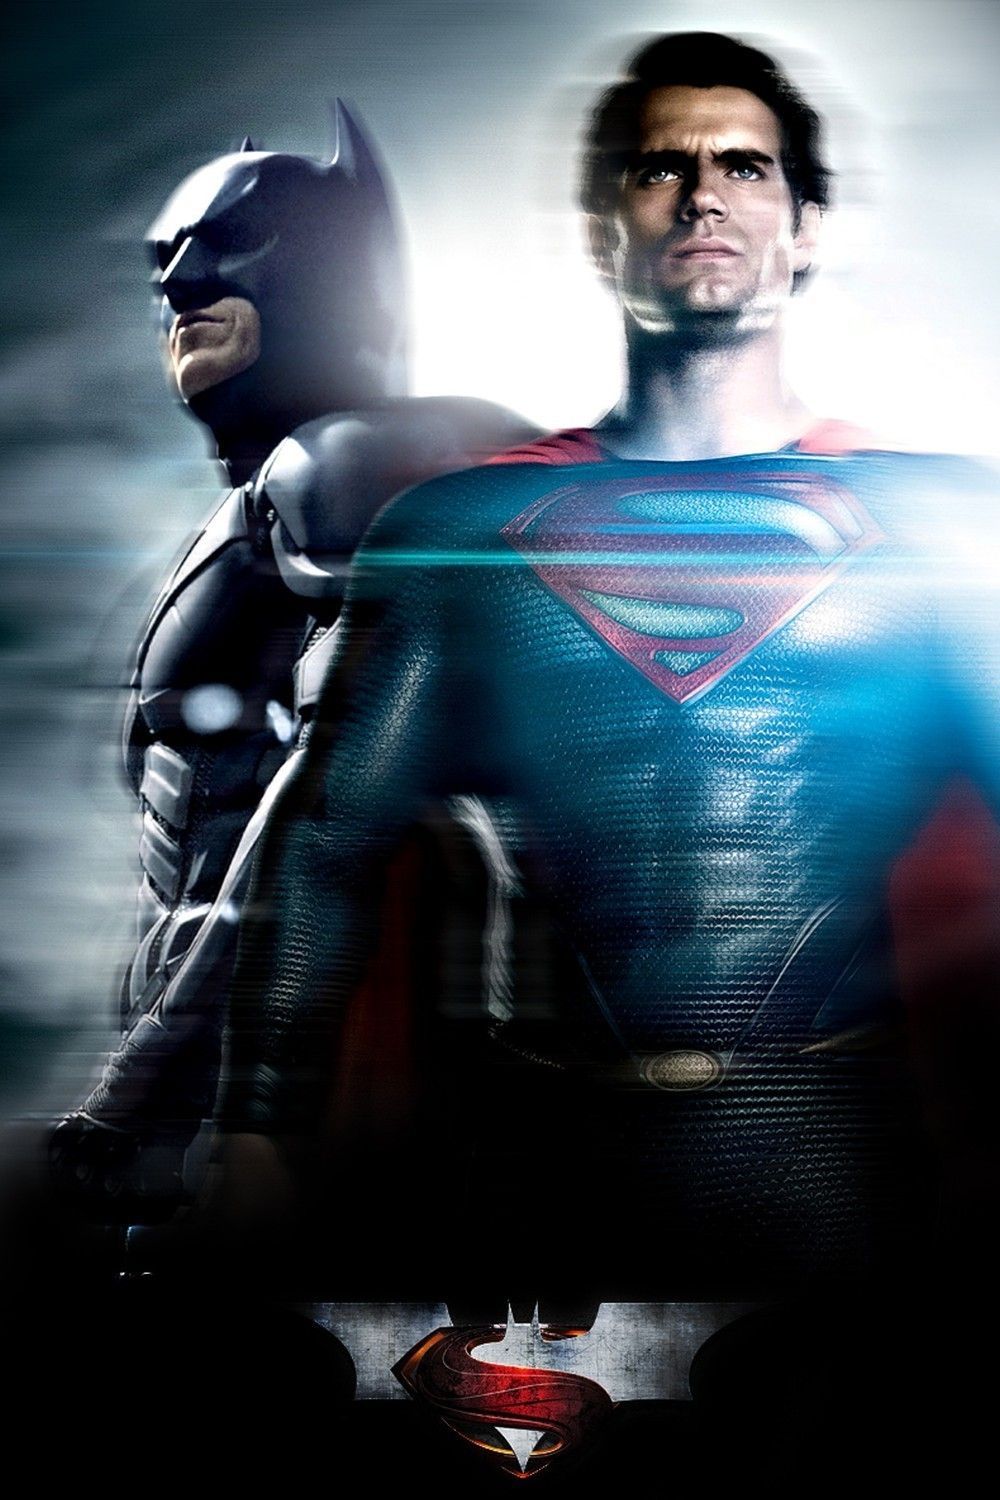 Batman v Superman: Dawn of Justice: Download this Poster at fmpds